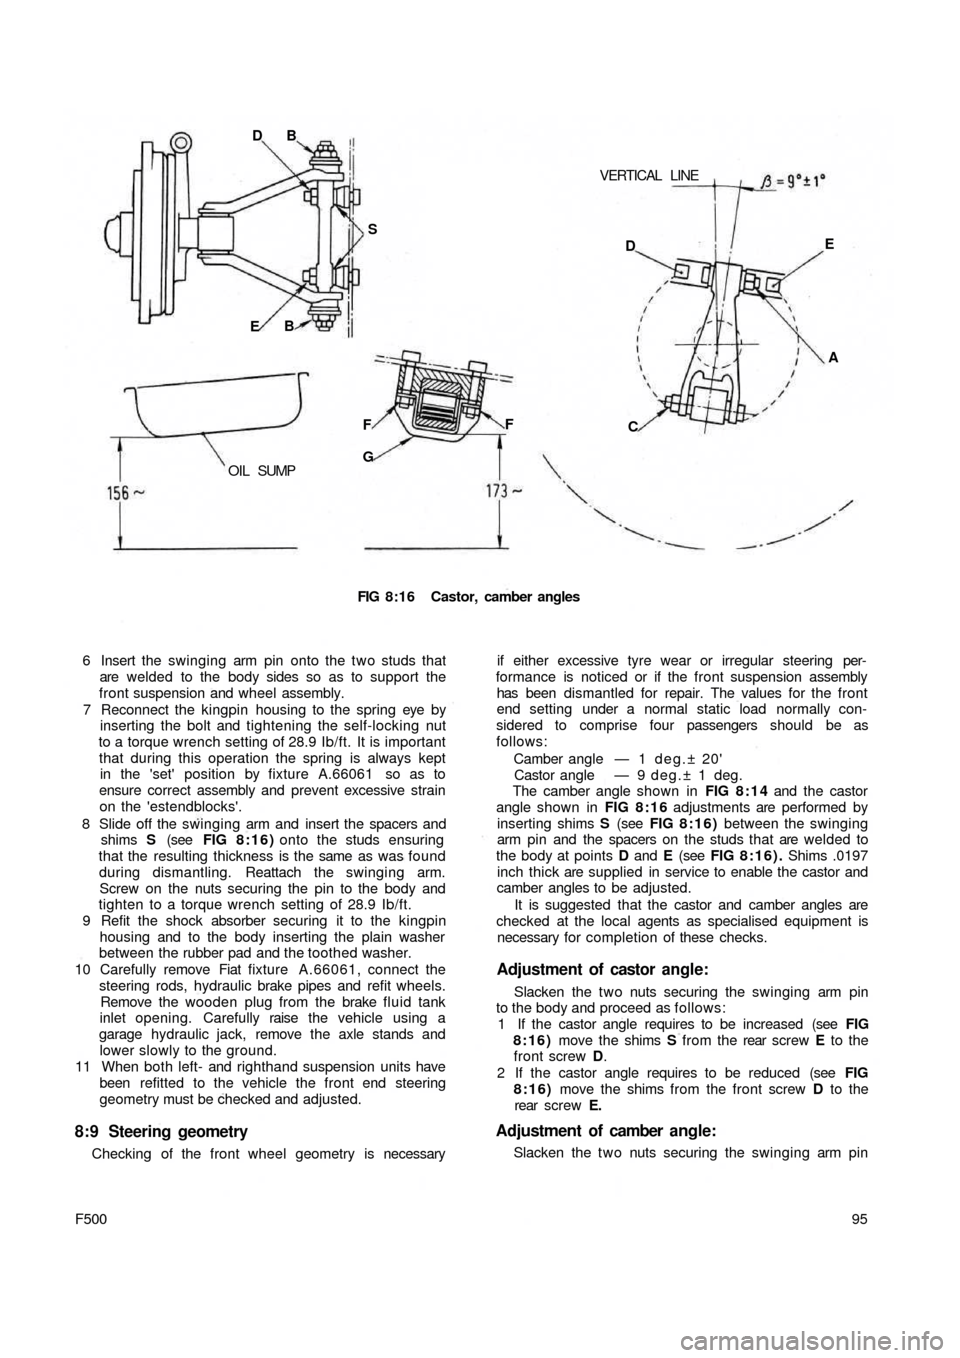 FIAT 500 1957 1.G Workshop Manual VERTICAL  LINE DB
S
EB
OIL  SUMPF
GF
FIG 8:16 Castor, camber angles
6 Insert the swinging arm pin onto the two studs that
are welded  to the  body sides so as to support the
front suspension and wheel